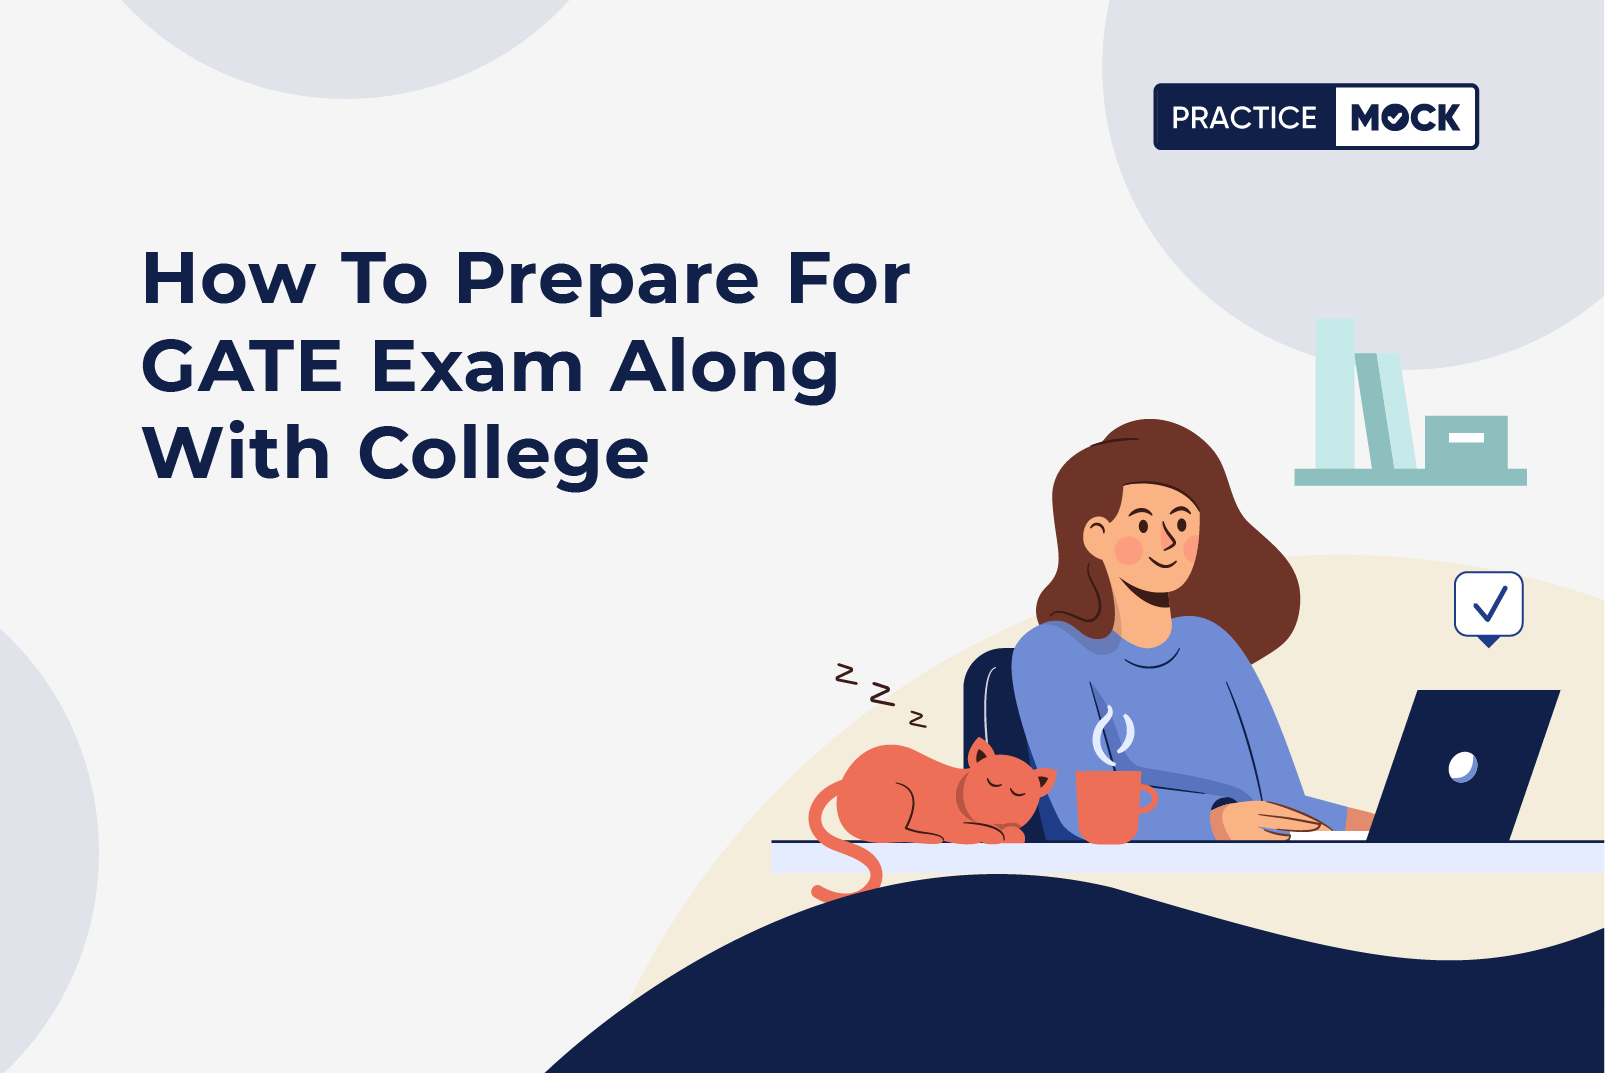 How to Prepare for GATE Exam along with College?